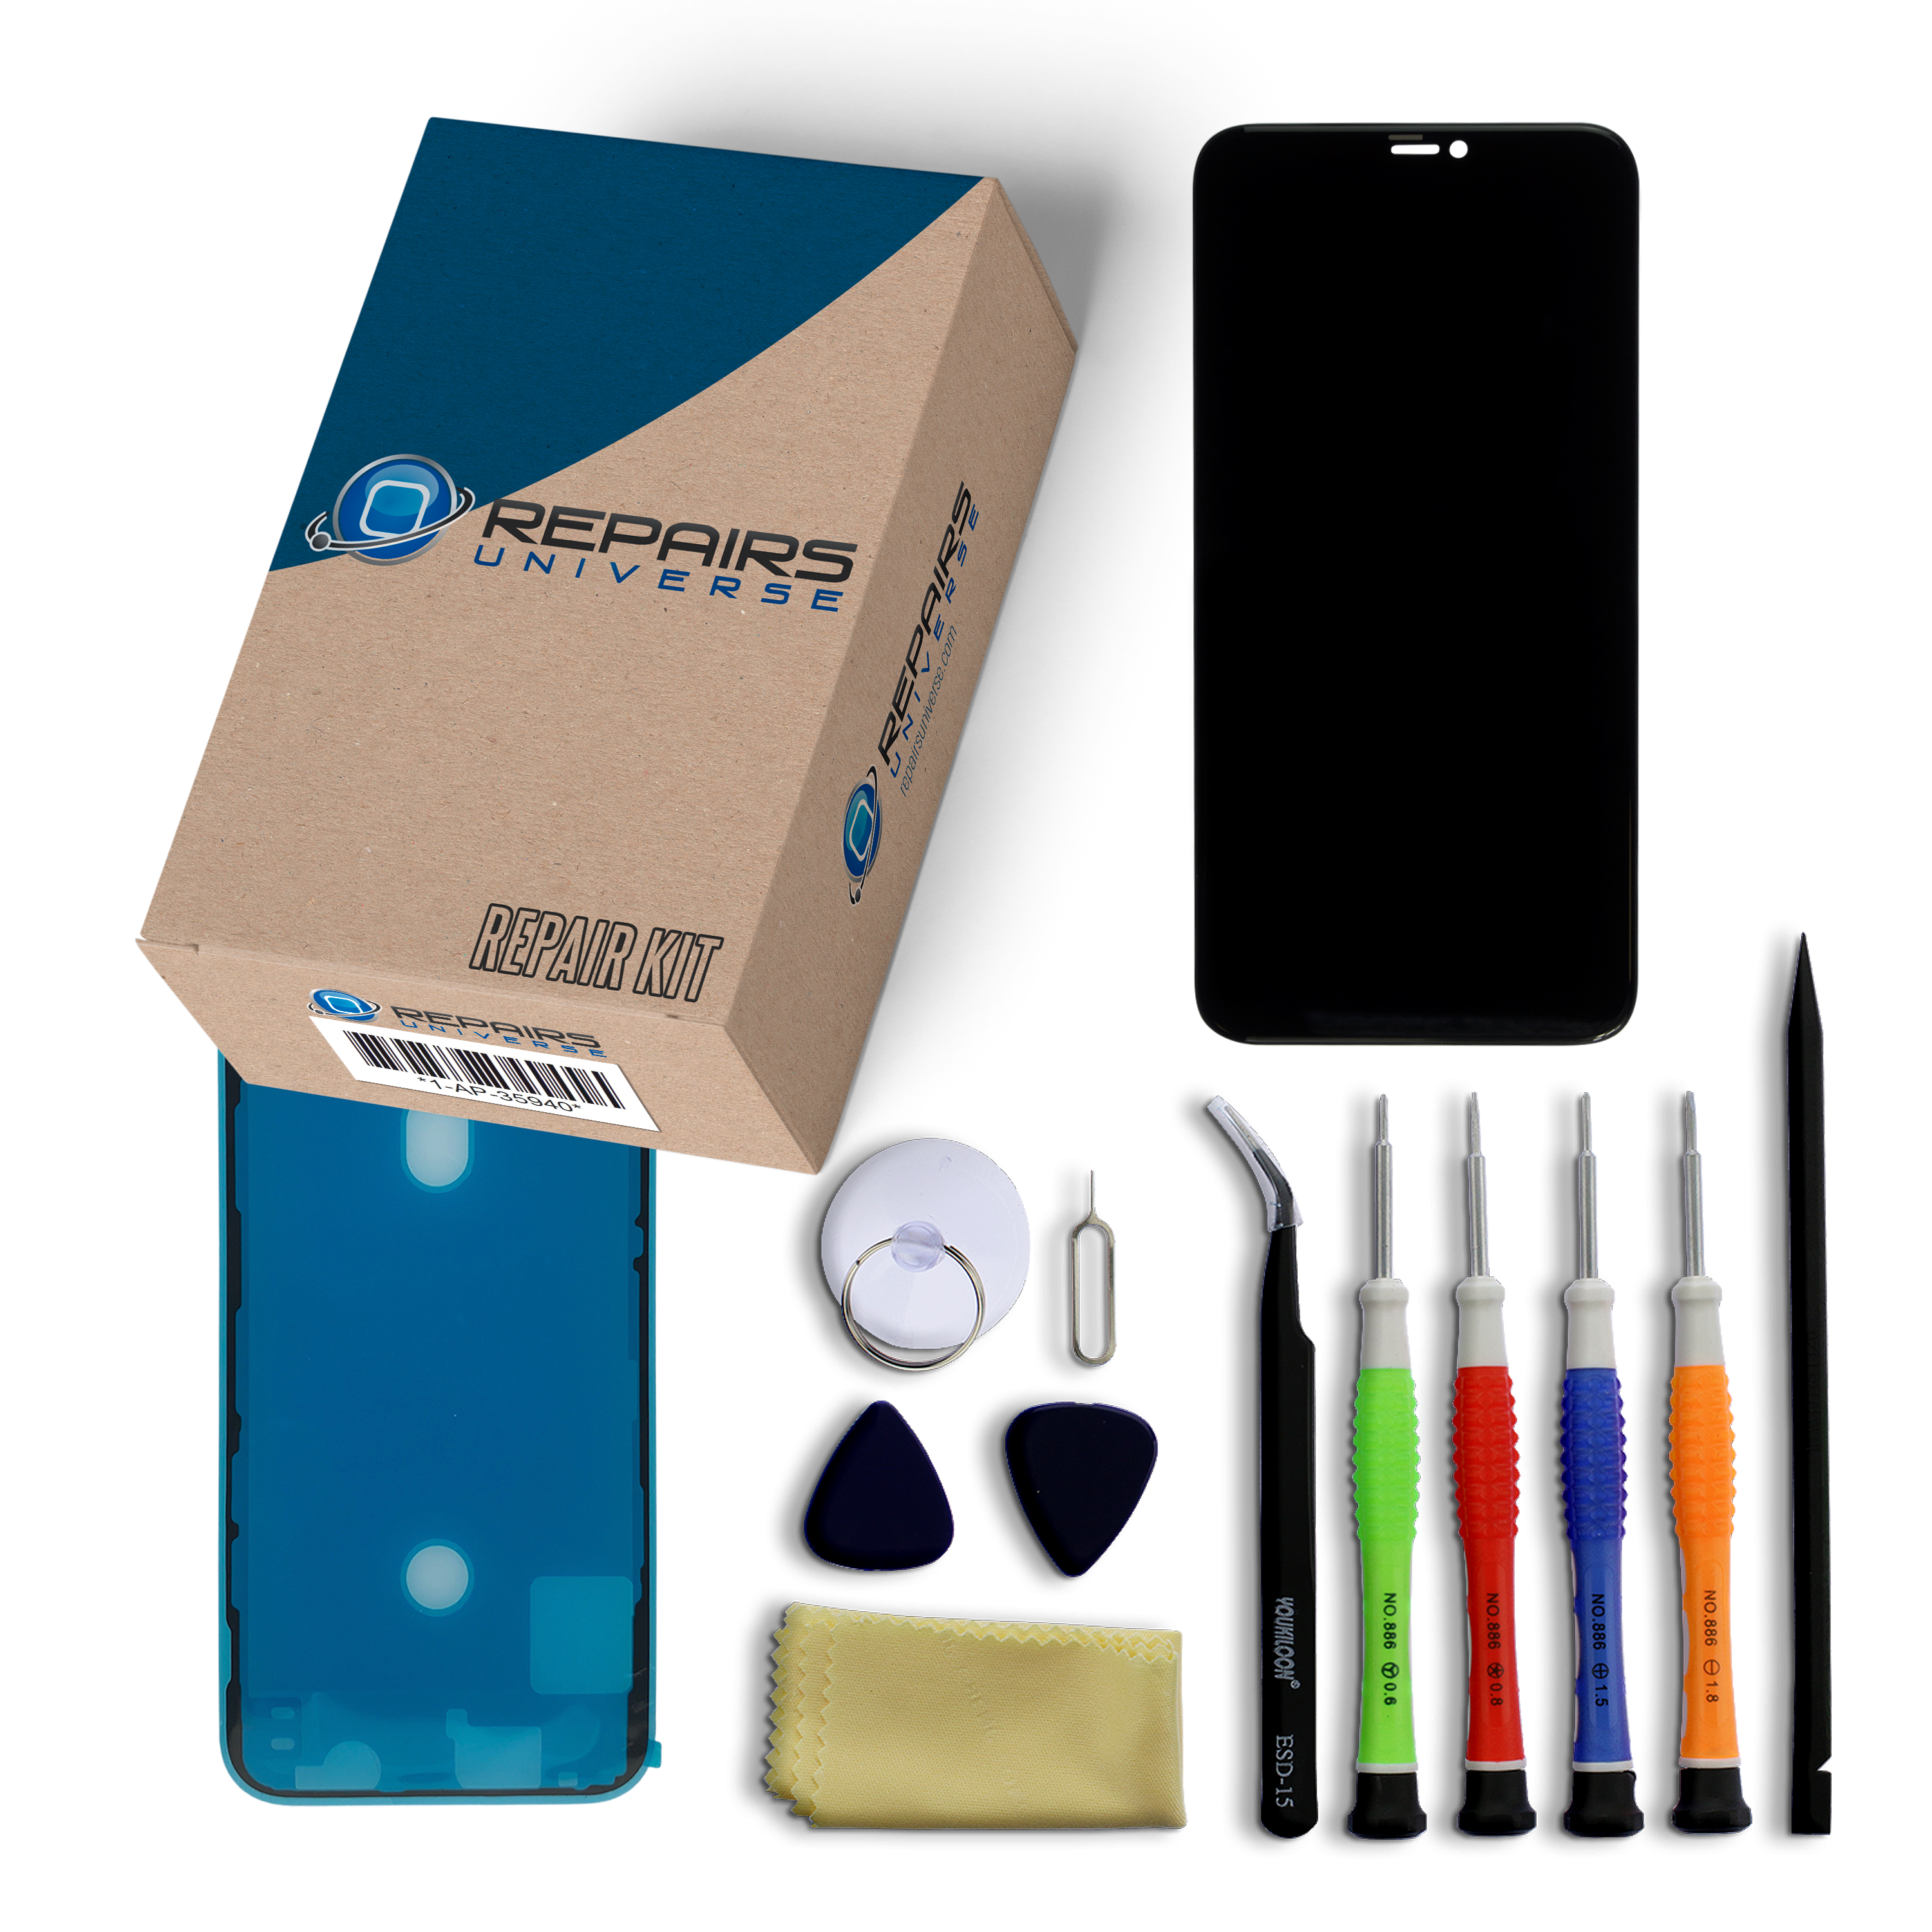 iPhone 11 Pro Max OLED Screen Replacement + Complete Repair Kit + Easy Video Guide (Premium)